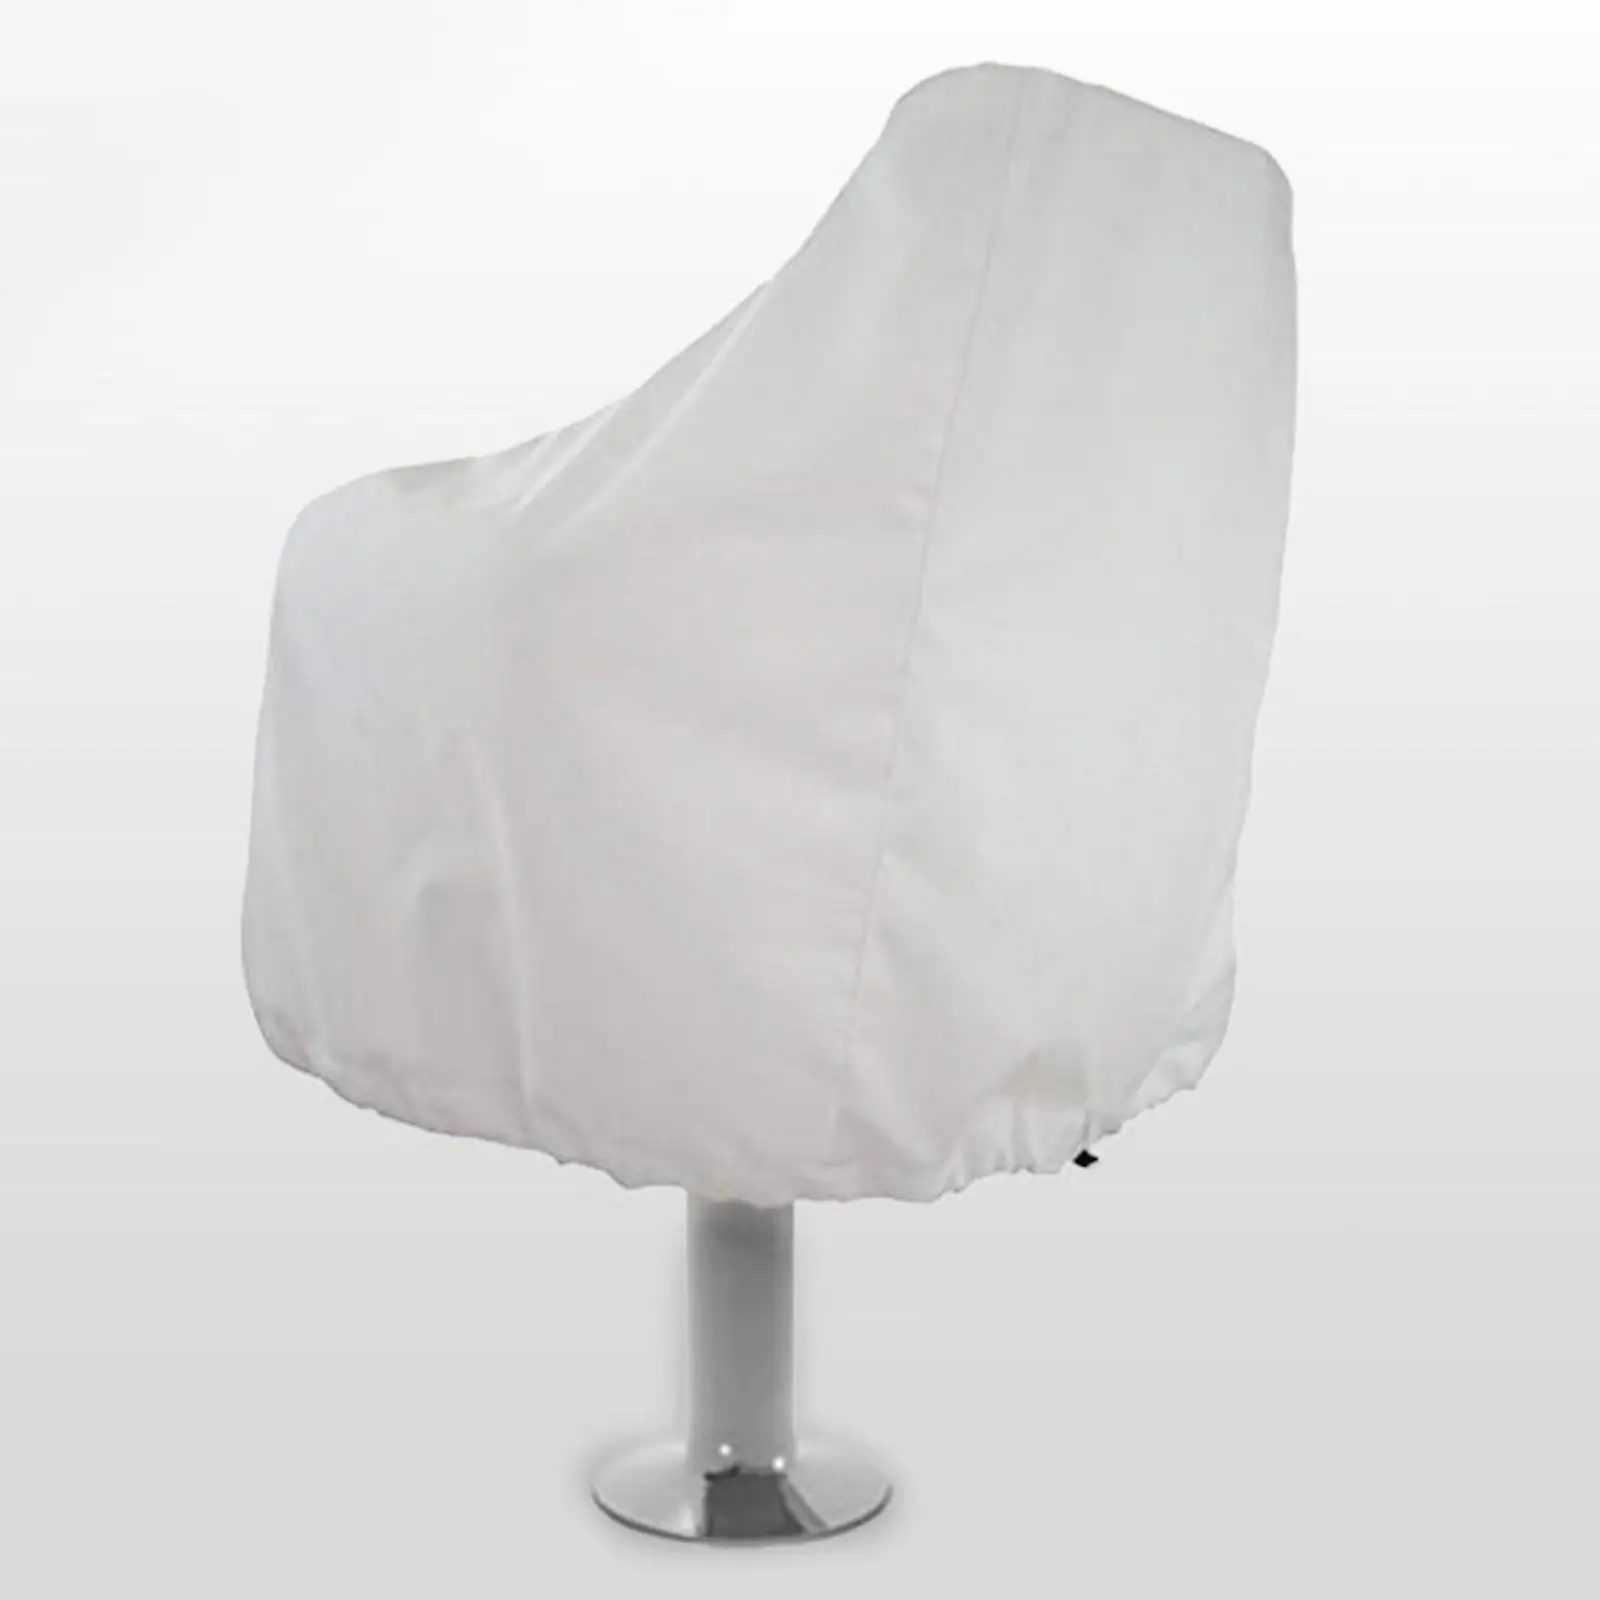 Seat Cover Boat Yacht Waterproof Protective Anti-High Quality